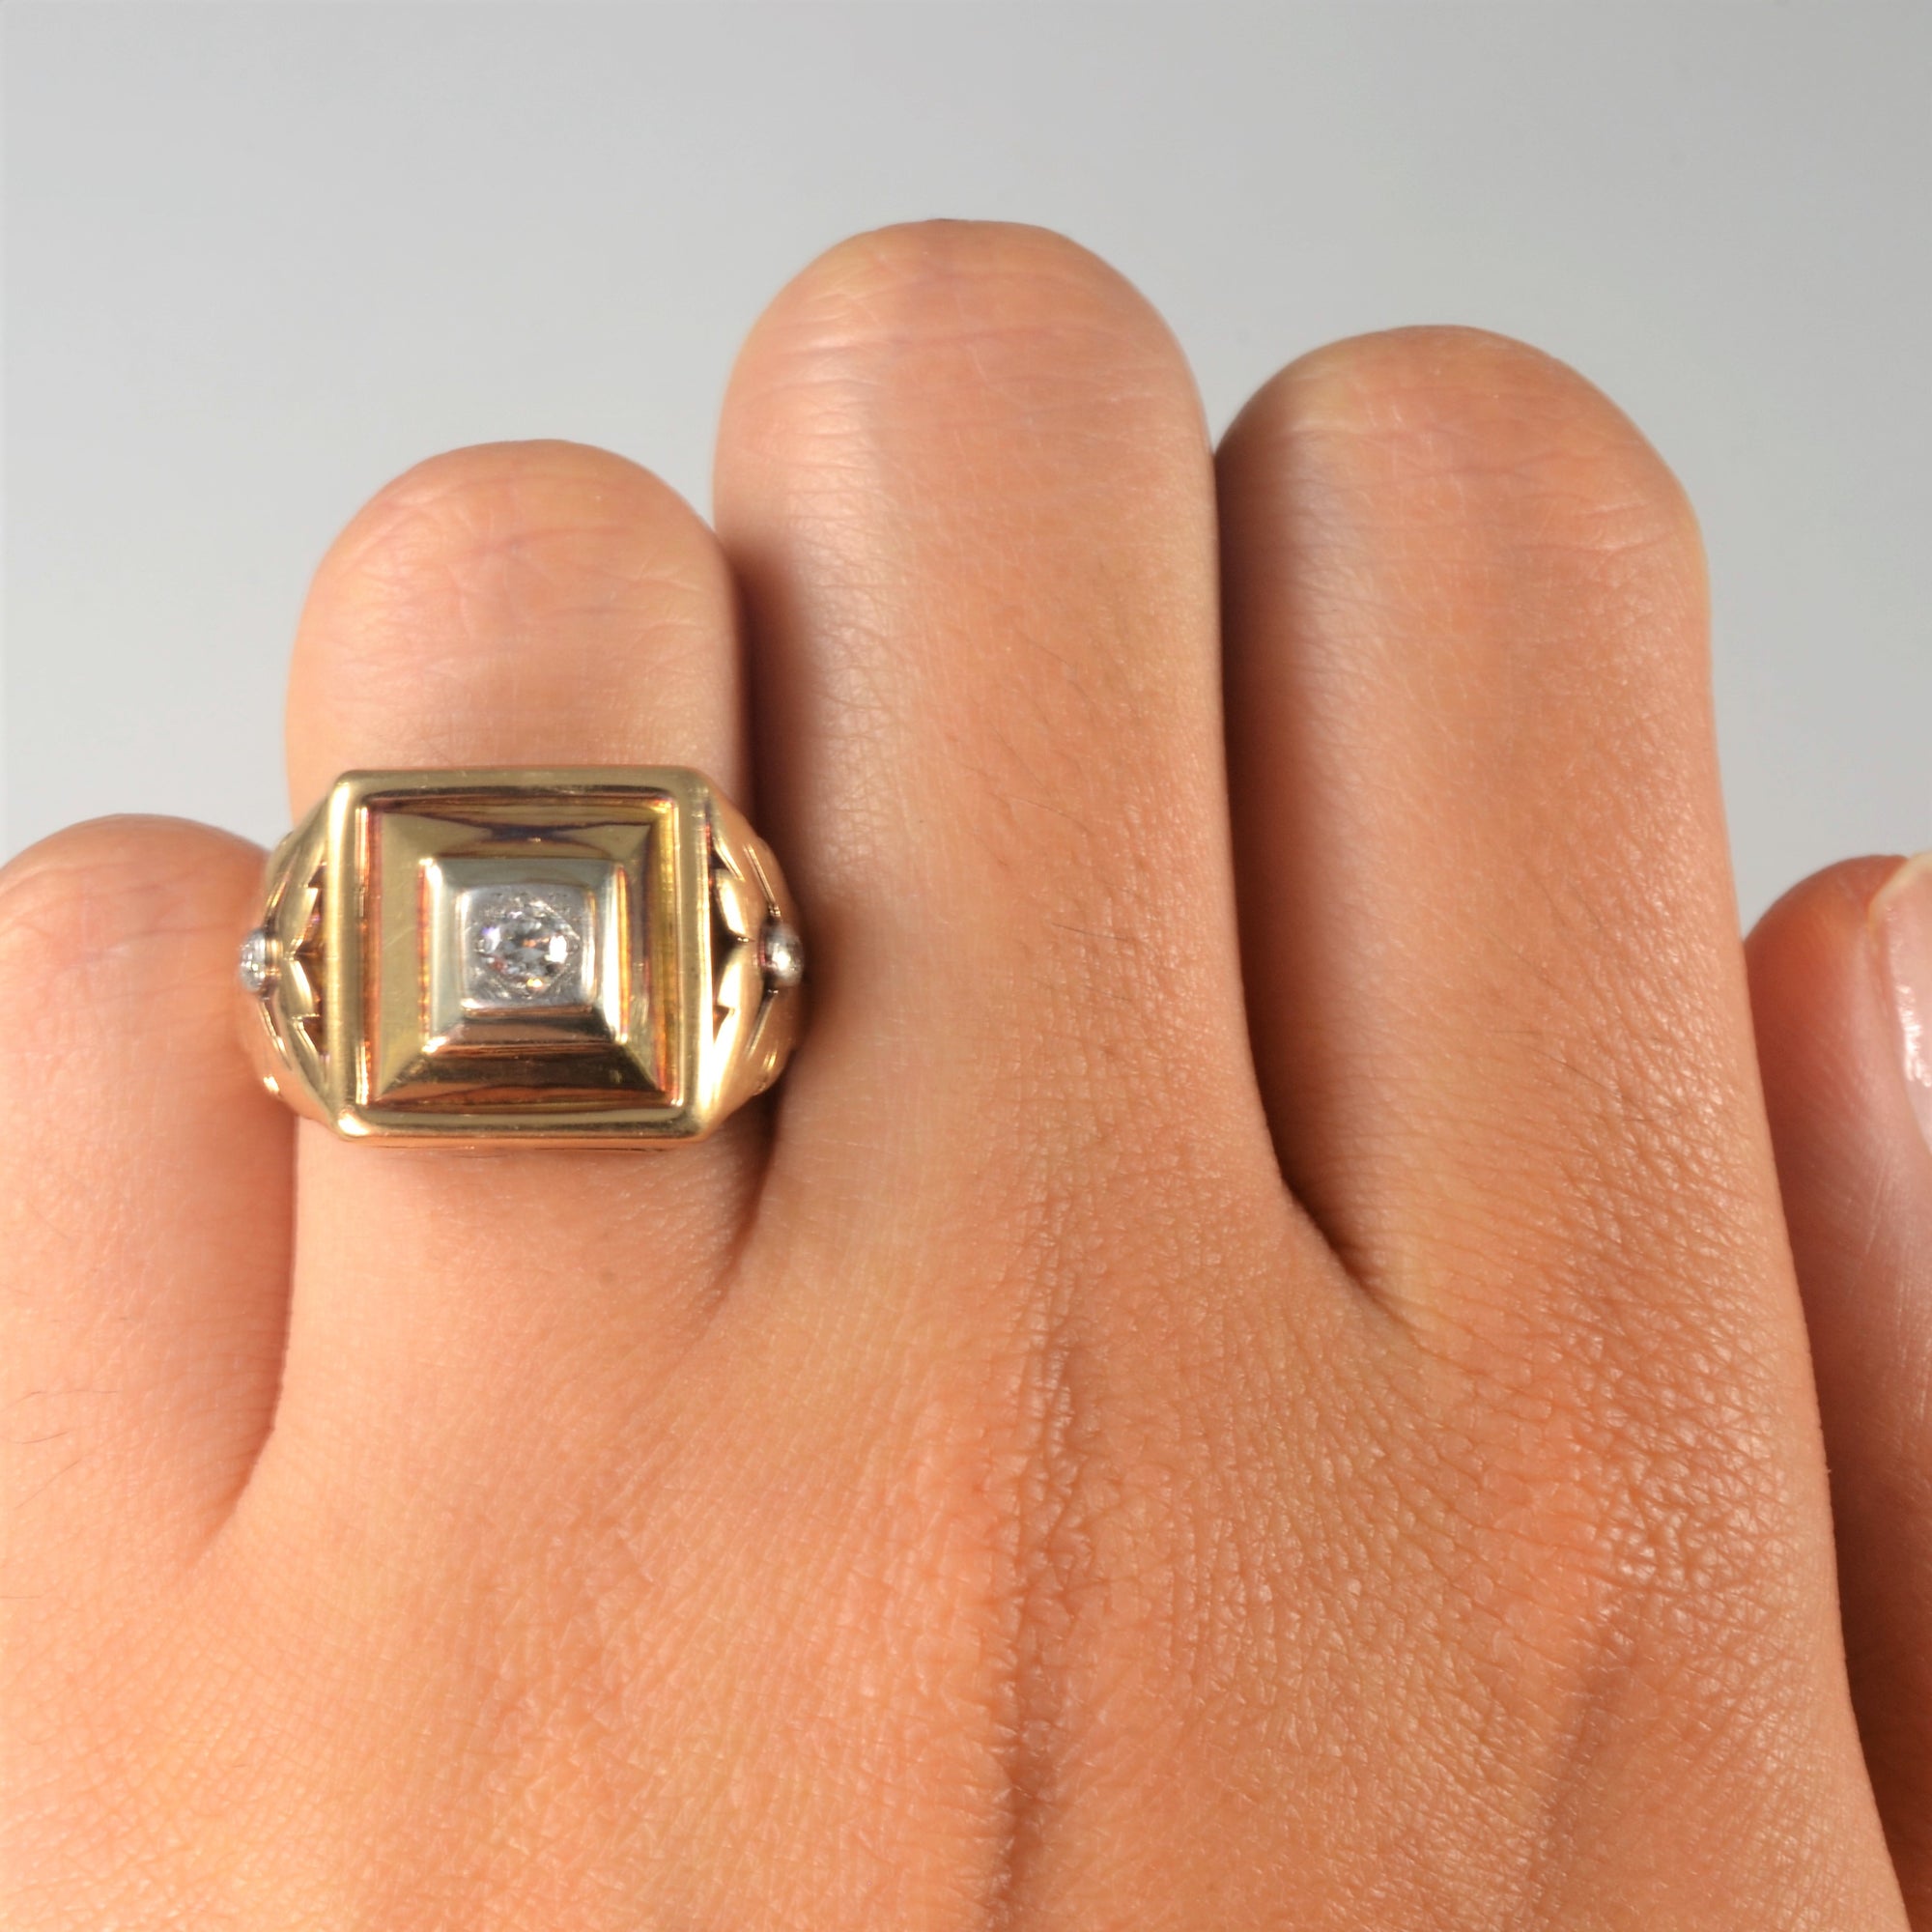 Early 1900s Blossom Detailed Diamond Ring | 0.10ctw | SZ 5.75 |